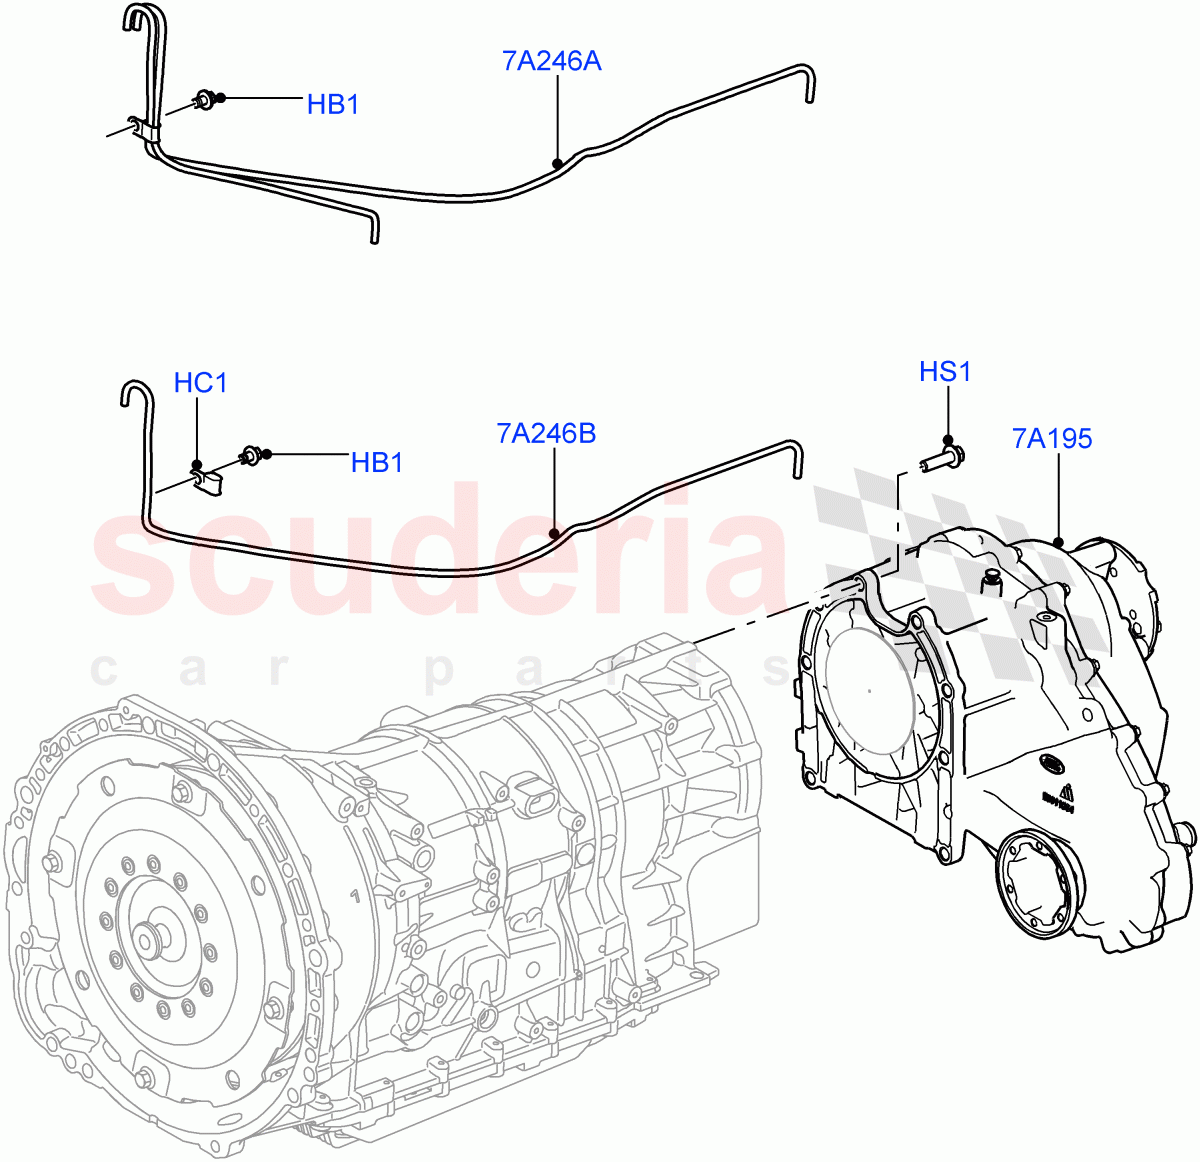 Transfer Drive Case(8 Speed Auto Trans ZF 8HP70 4WD,With 1 Speed Transfer Case,8 Speed Auto Trans ZF 8HP45)((V)FROMEA000001,(V)TOGA999999) of Land Rover Land Rover Range Rover (2012-2021) [5.0 OHC SGDI SC V8 Petrol]